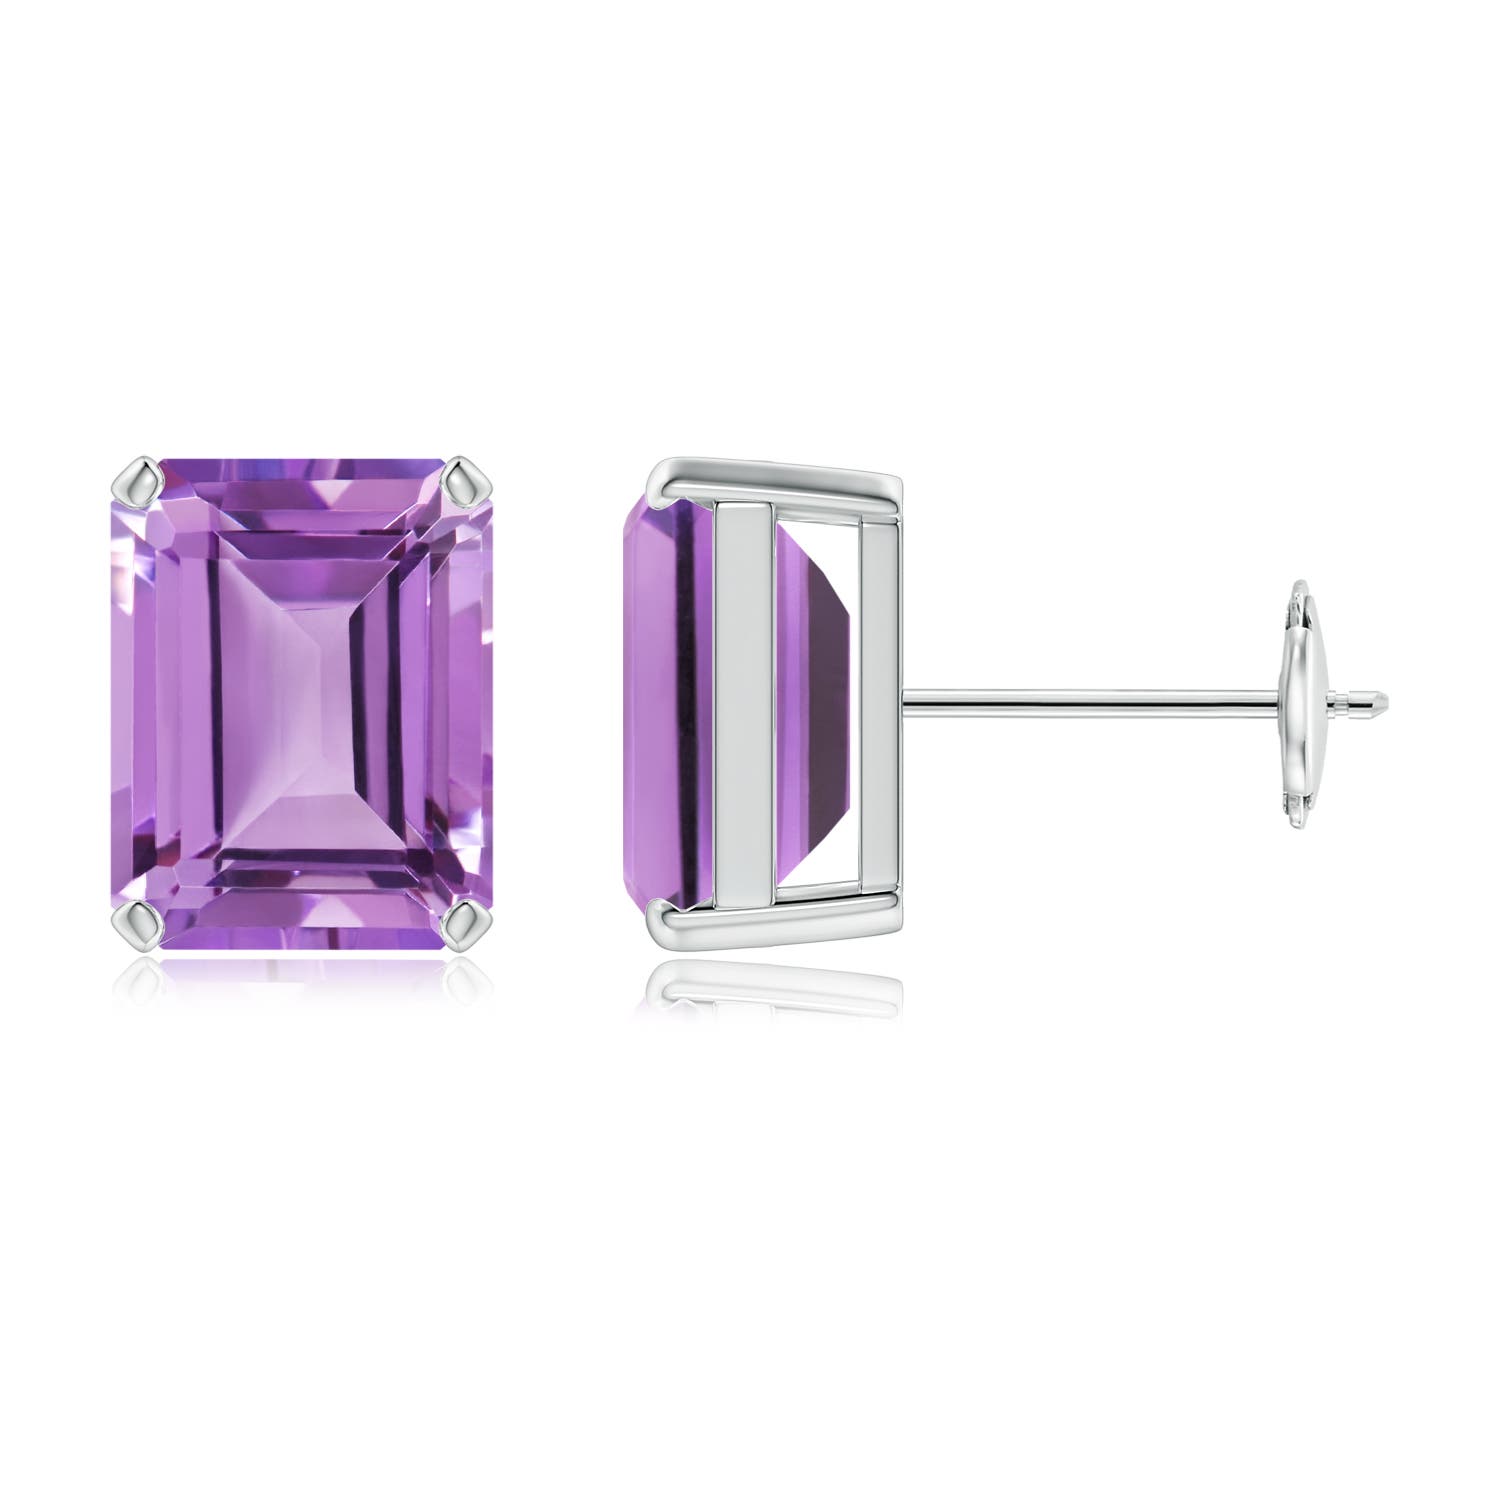 A - Amethyst / 4.4 CT / 14 KT White Gold